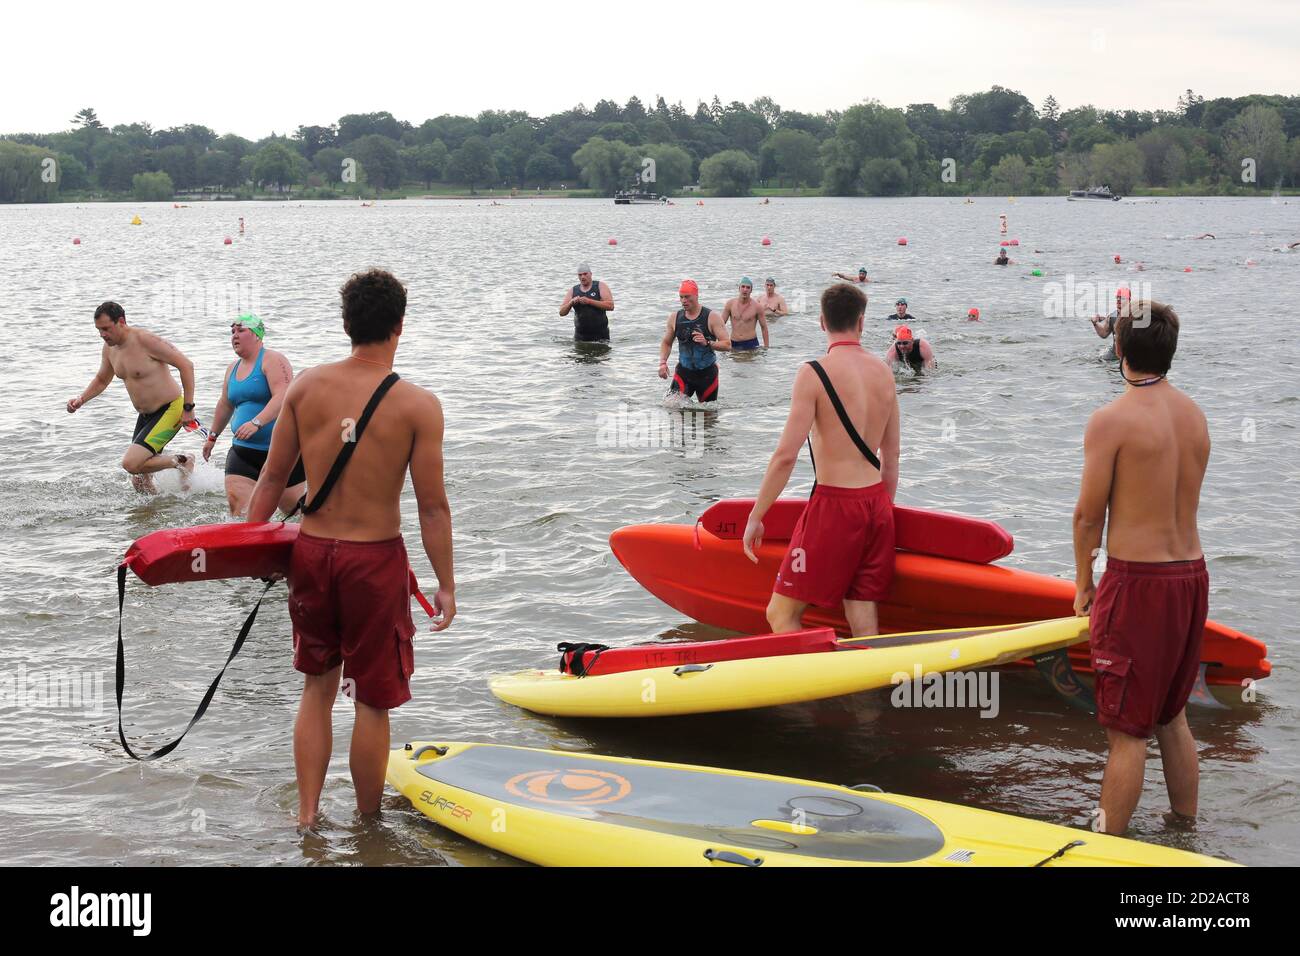 Lifeguards watch as swimmers emerge from the water at the Lifetime Fitness Triathlon in Minneapolis, Minnesota. Stock Photo